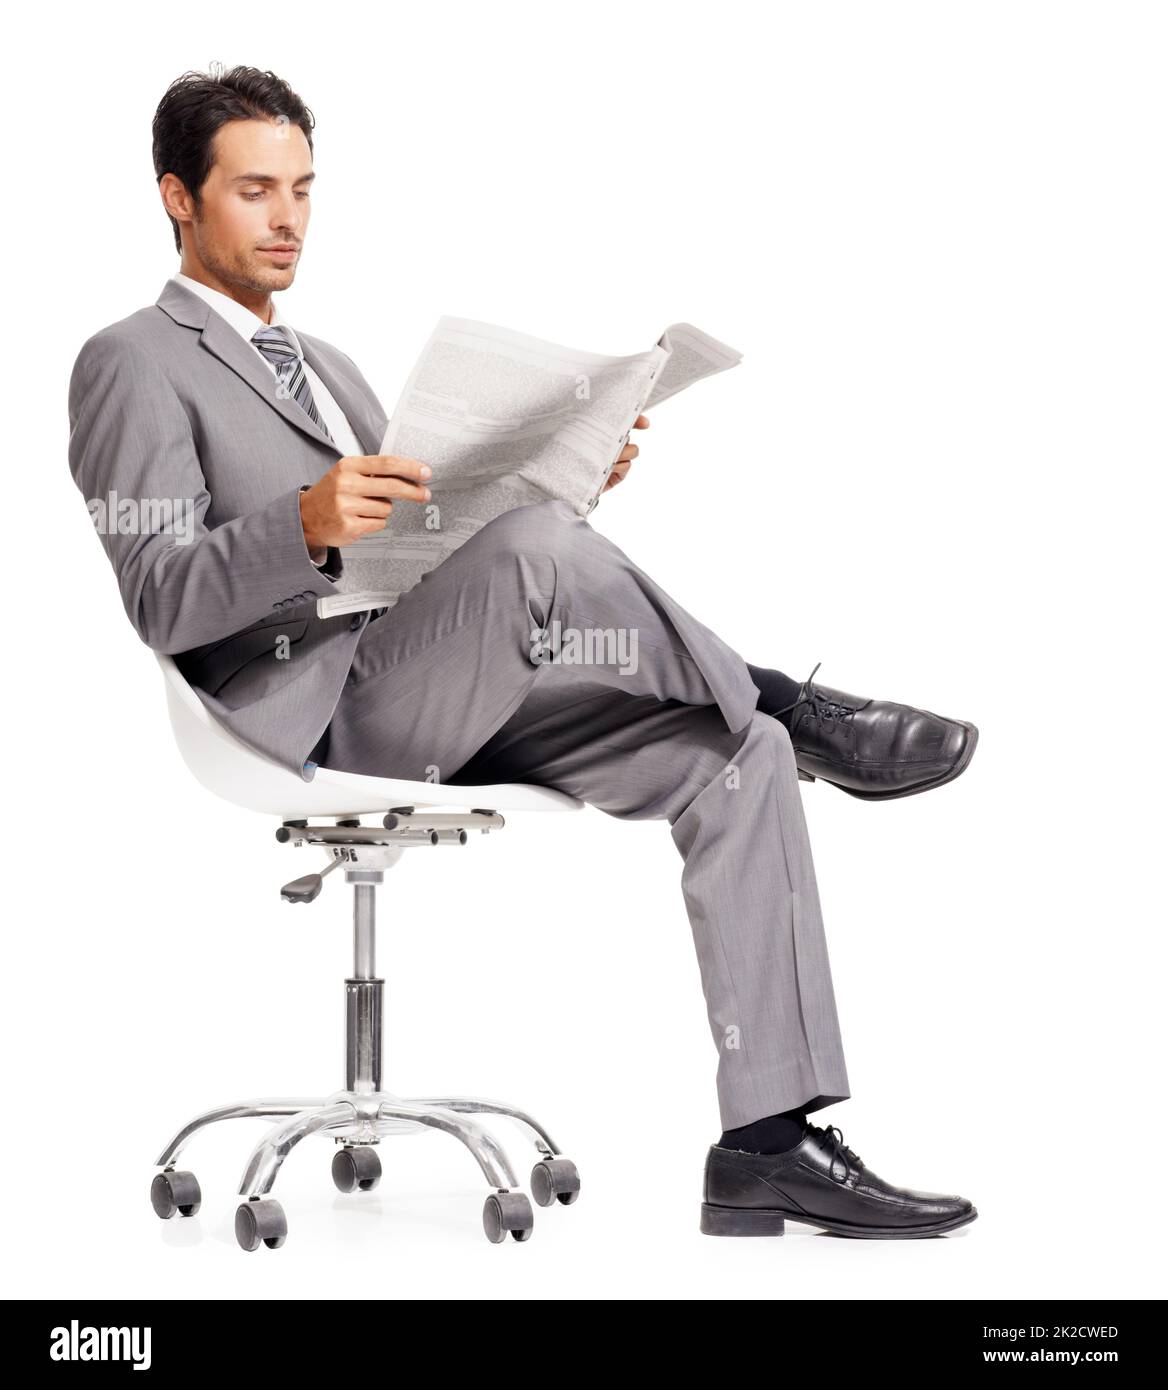 Keeping abreast of the stock market fluctuations. A handsome young executive reading a newspaper while isolated on a white background. Stock Photo